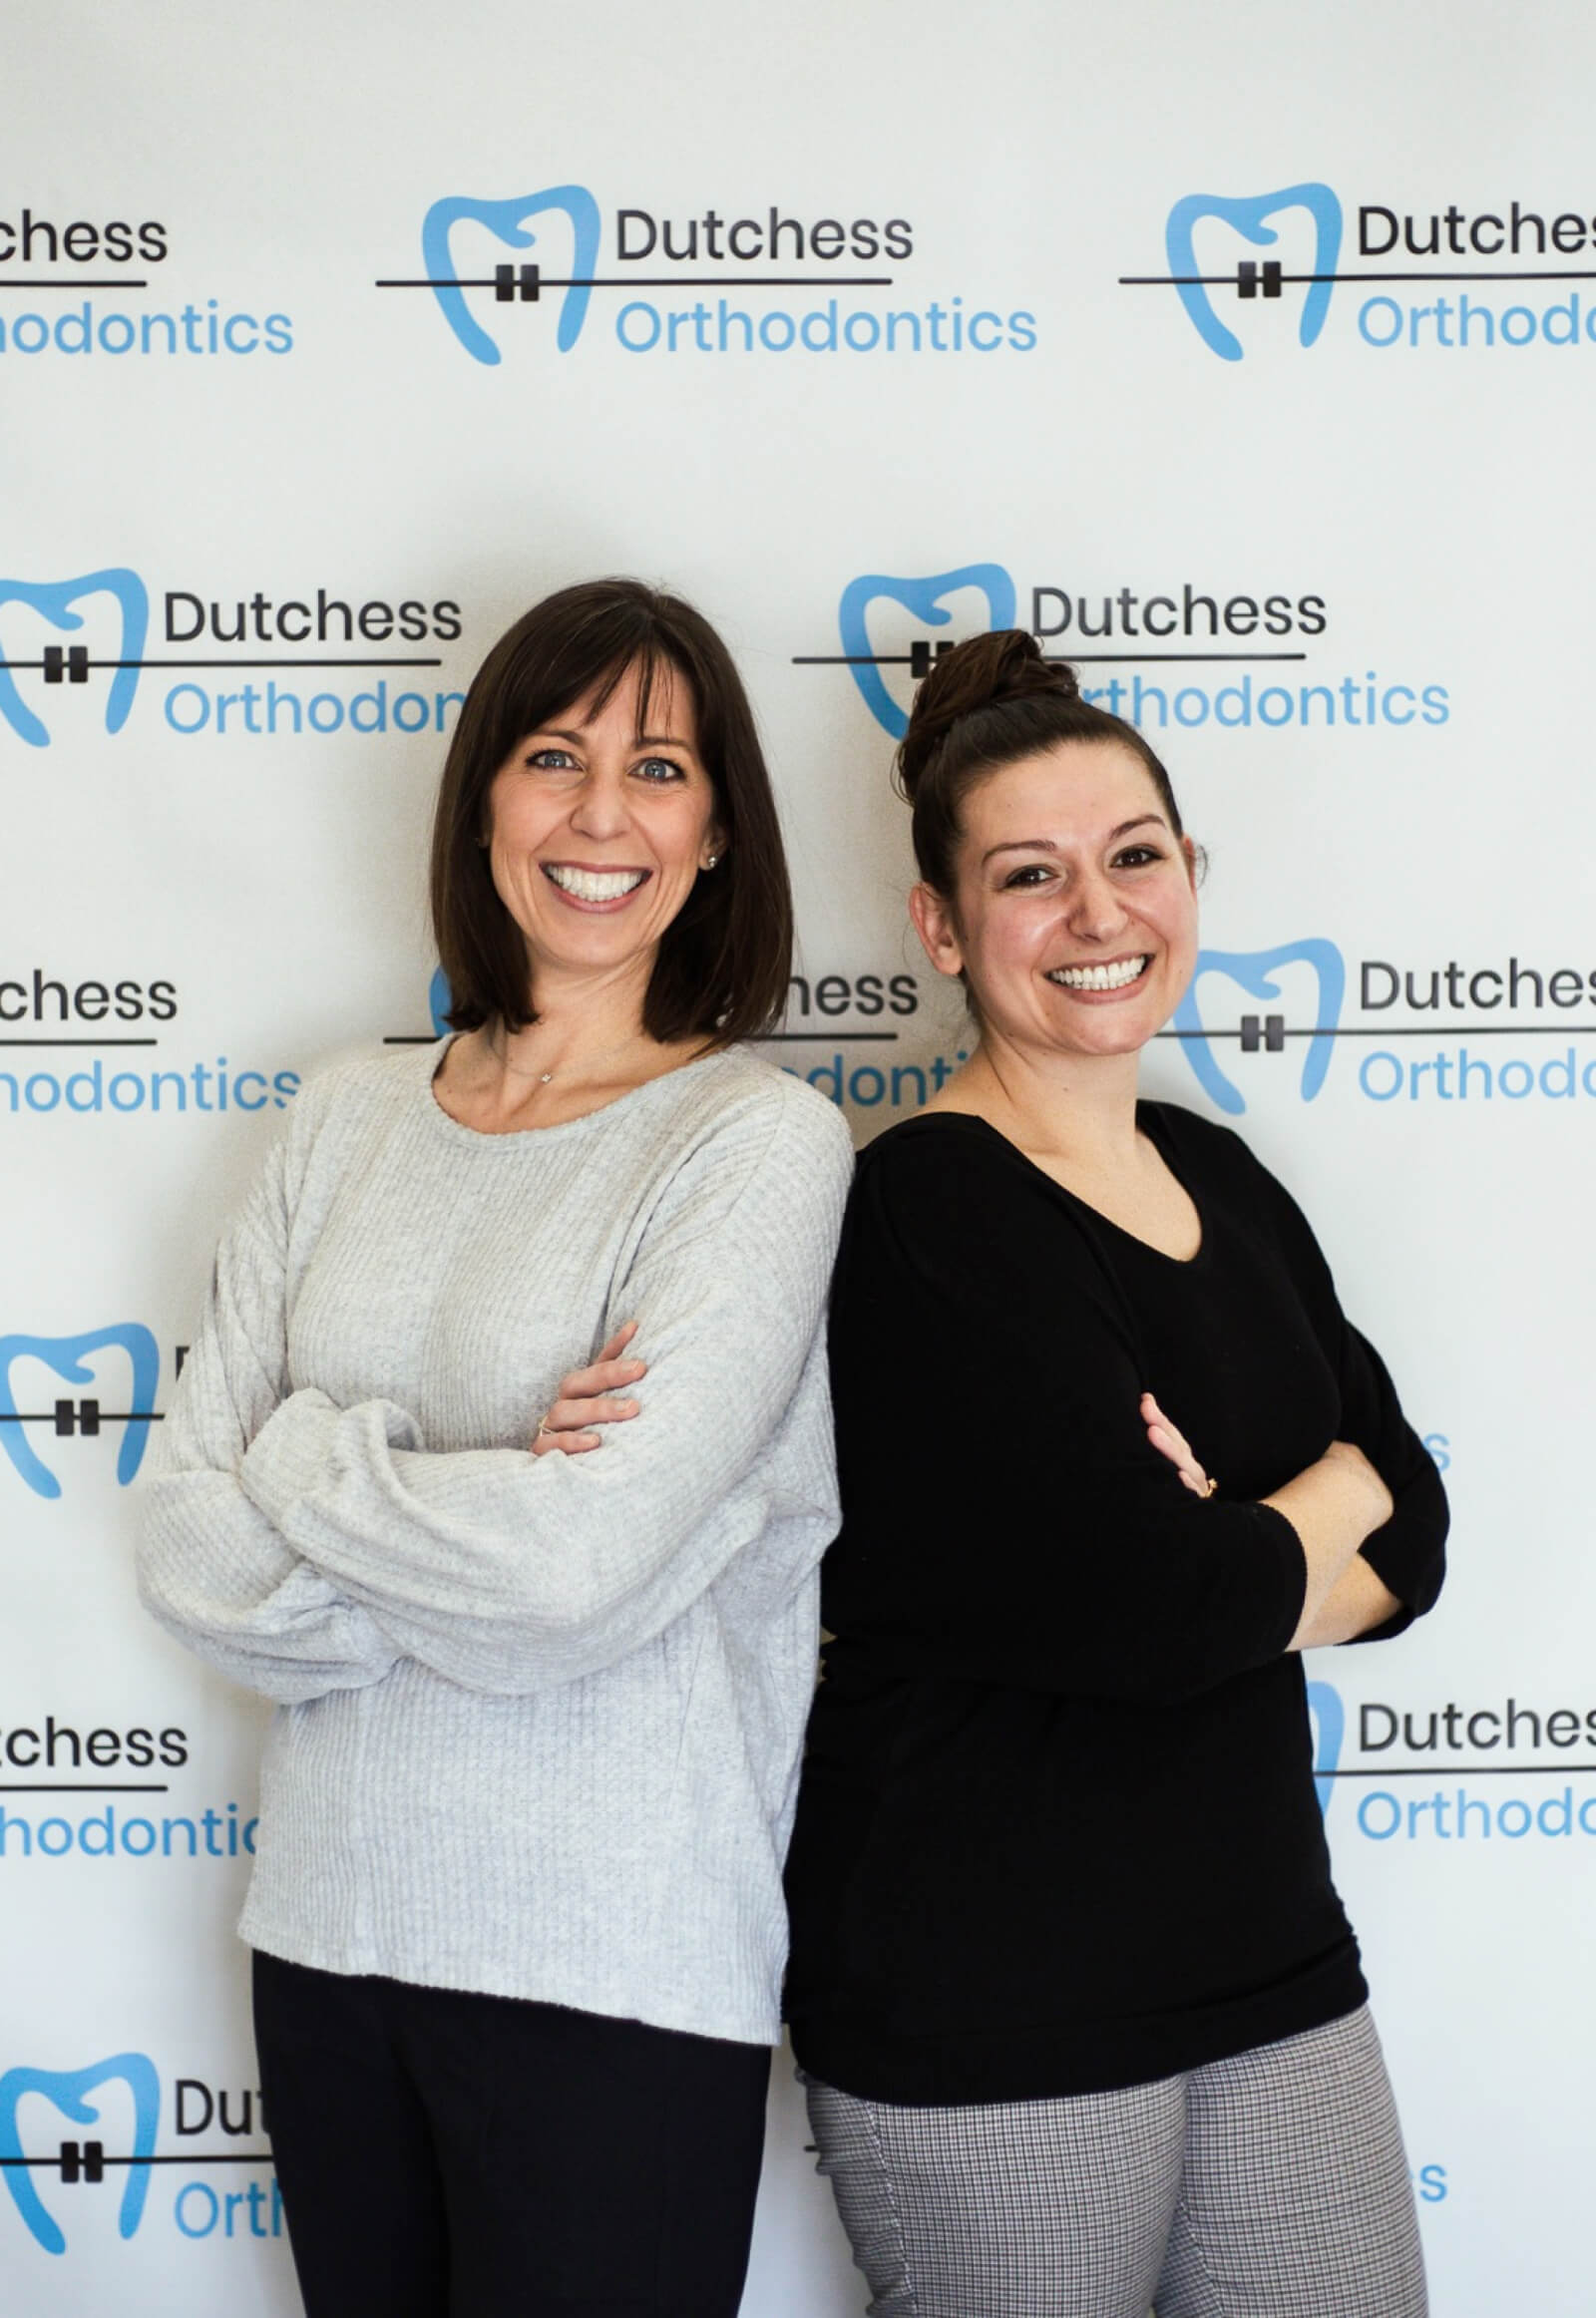 our orthodontists